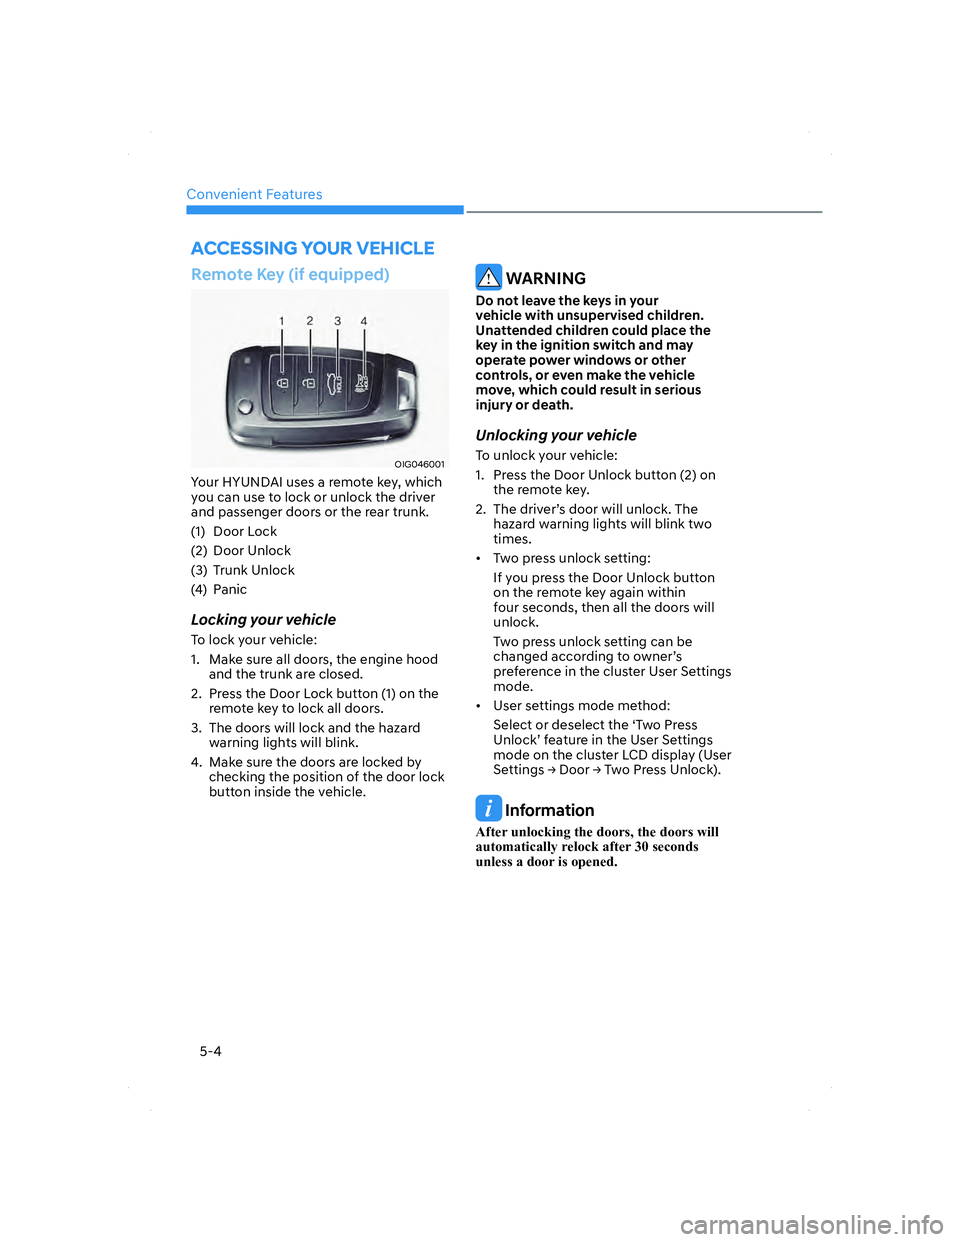 HYUNDAI ELANTRA 2022  Owners Manual Convenient Features
5-4
Remote Key (if equipped)
OIG046001OIG046001
Your HYUNDAI uses a remote key, which 
you can use to lock or unlock the driver 
and passenger doors or the rear trunk.
(1) Door Loc